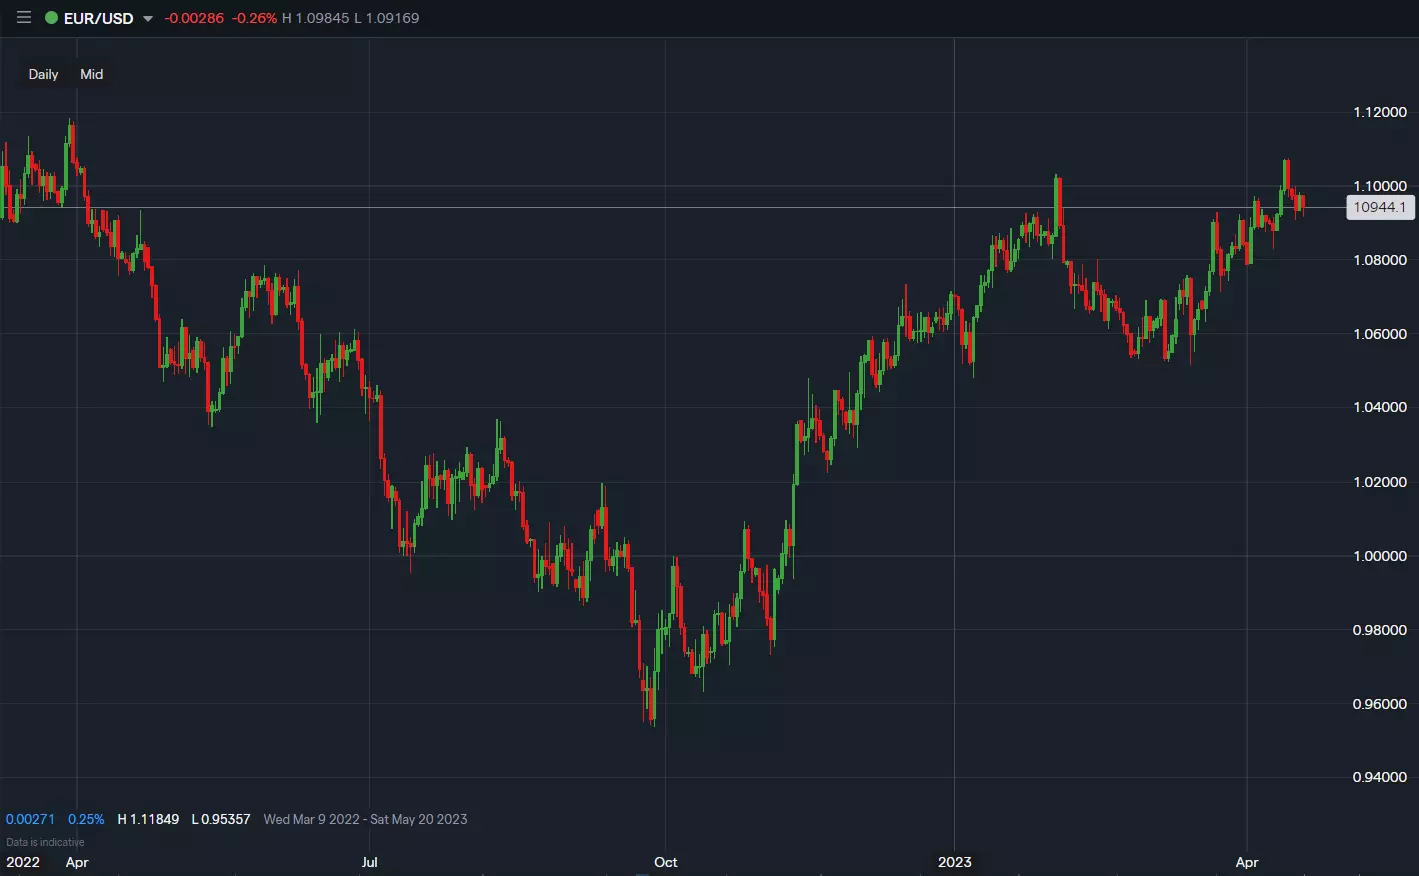 Euro-US Dollar price chart showing EUR/USD fall below 1.00 and bounce back to 1.10.